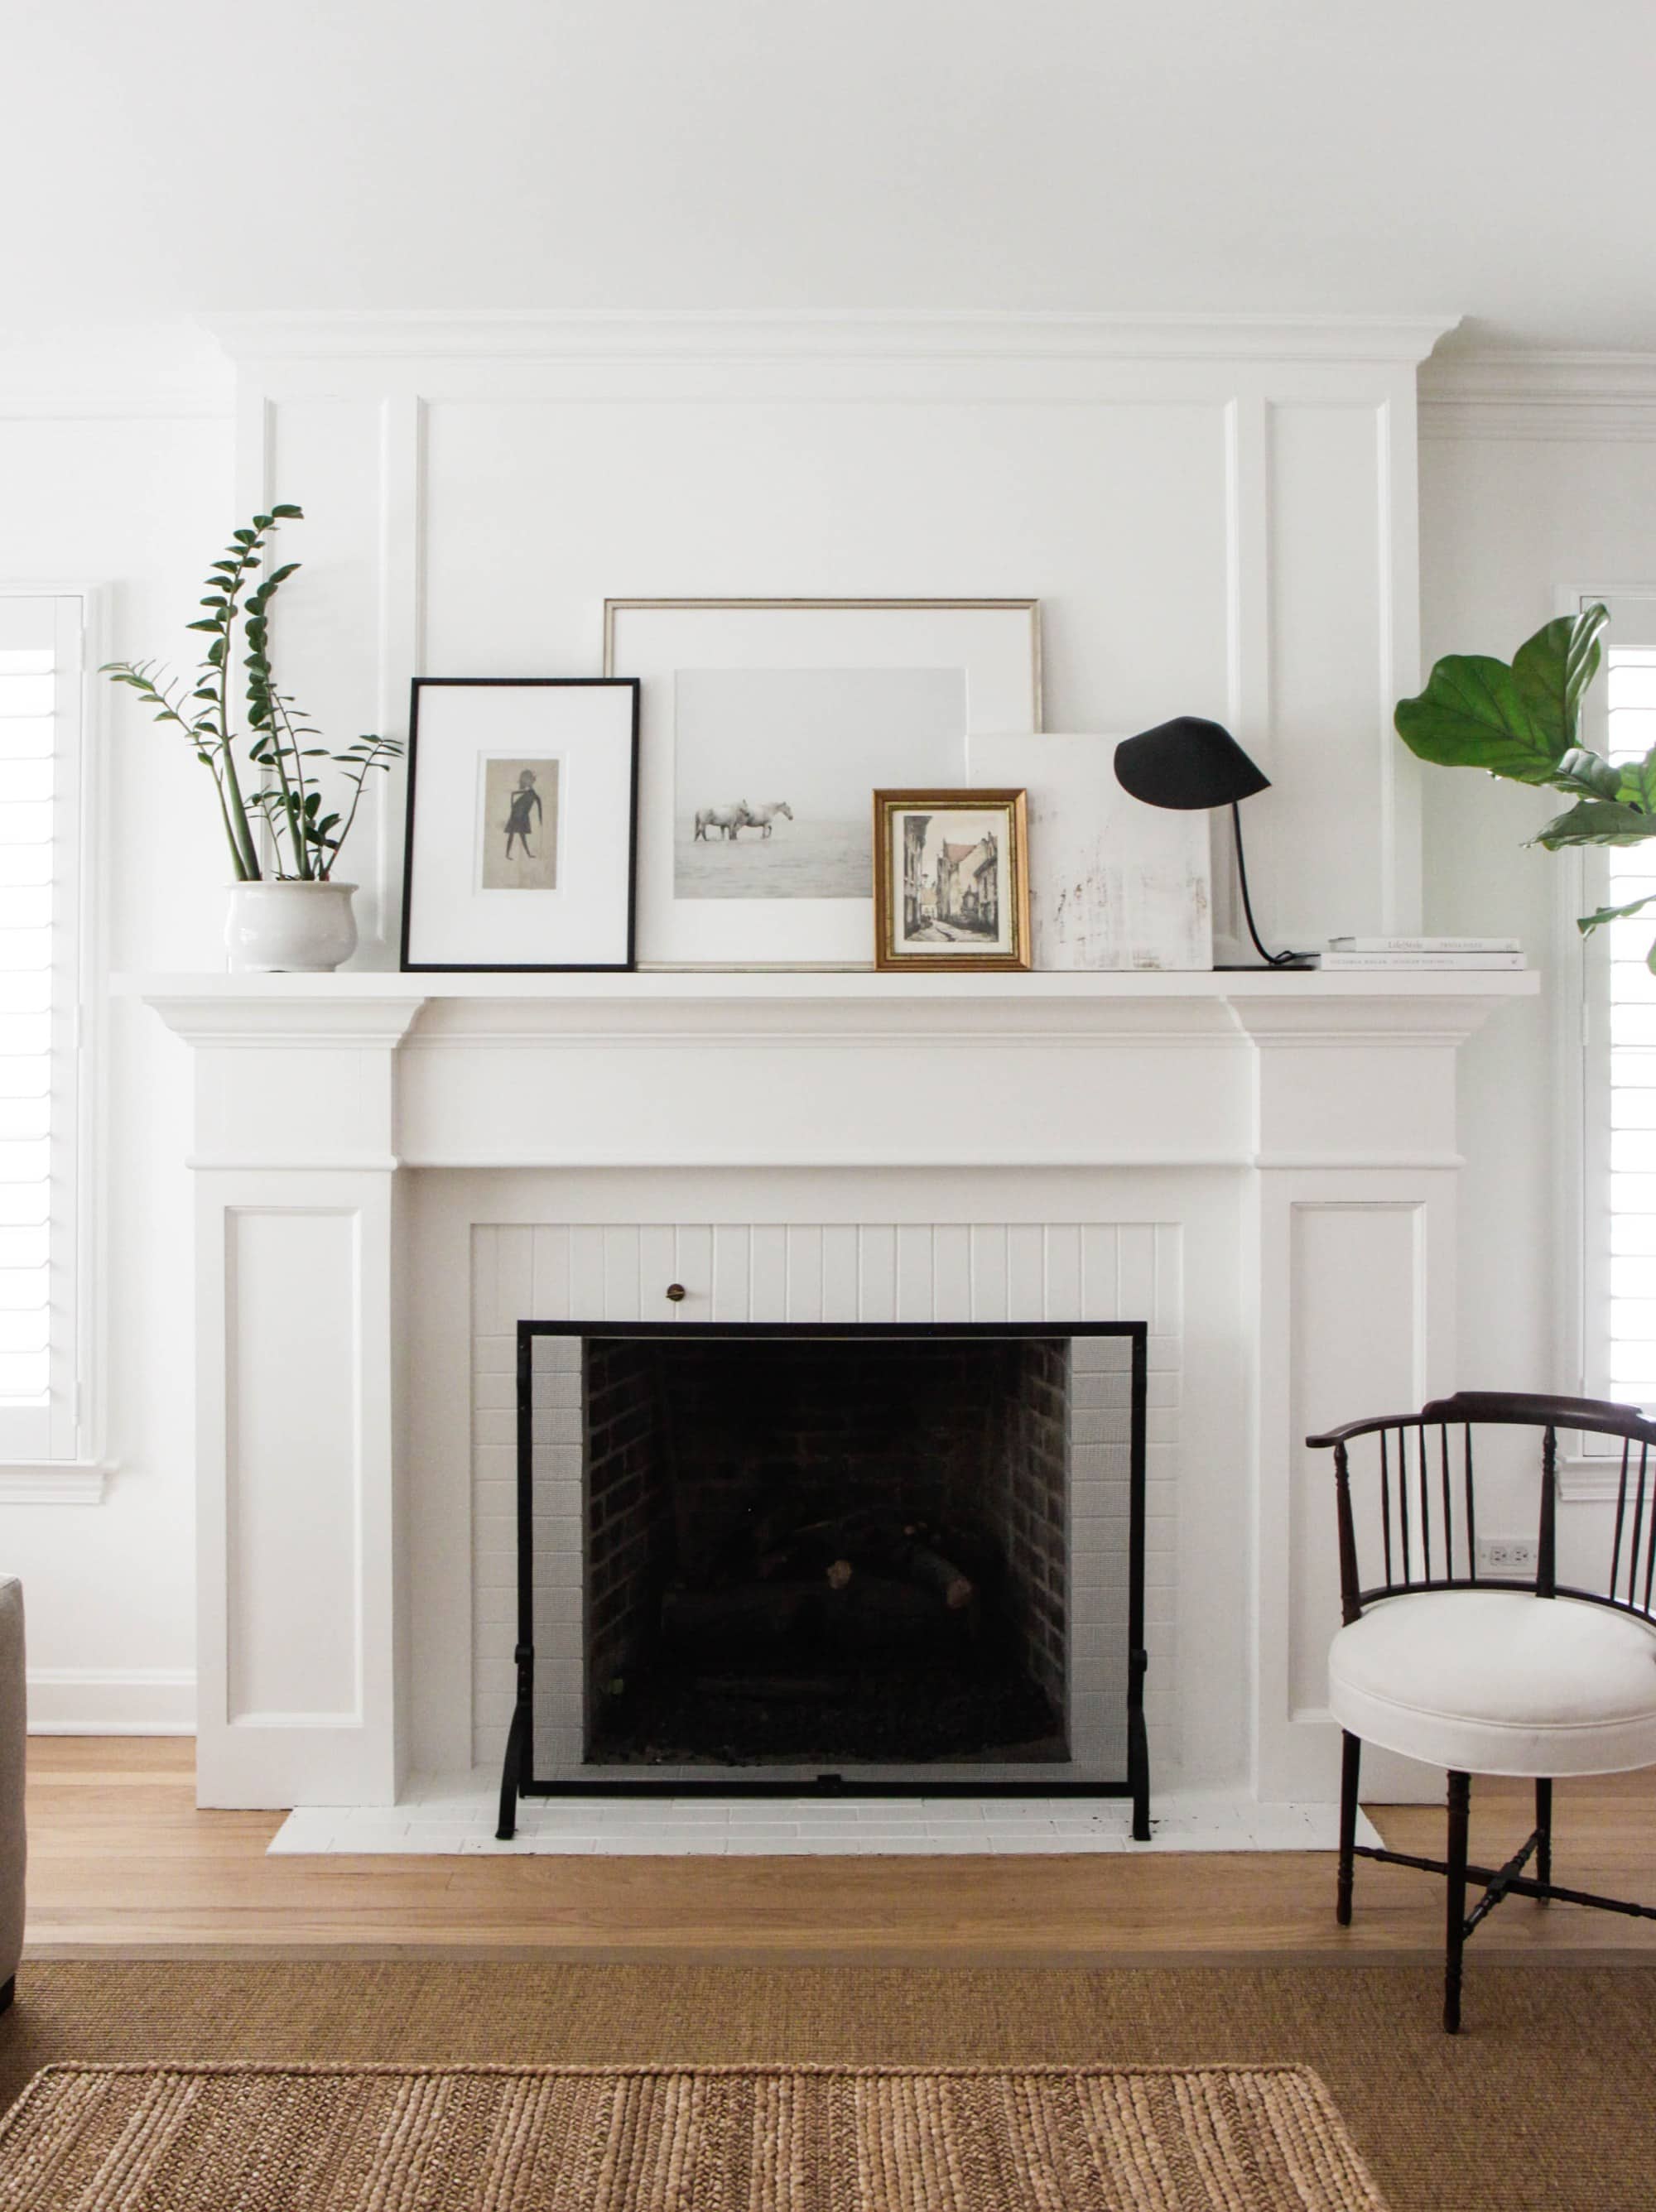 Fireplace Ideas: Mantel Styles for Today’s Homes